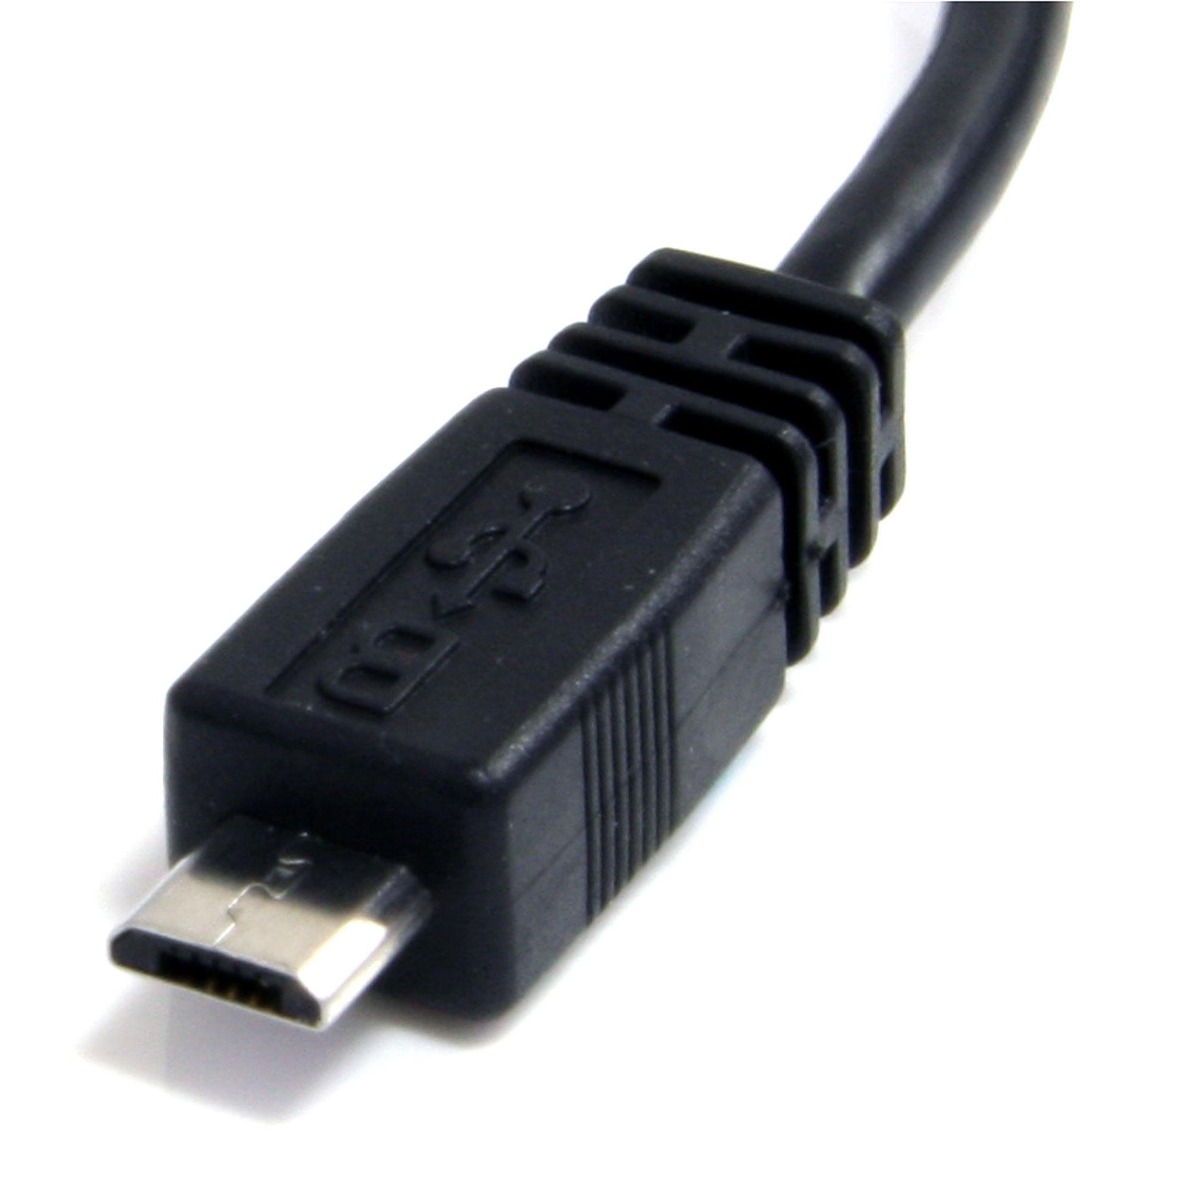 microUSB cable side view